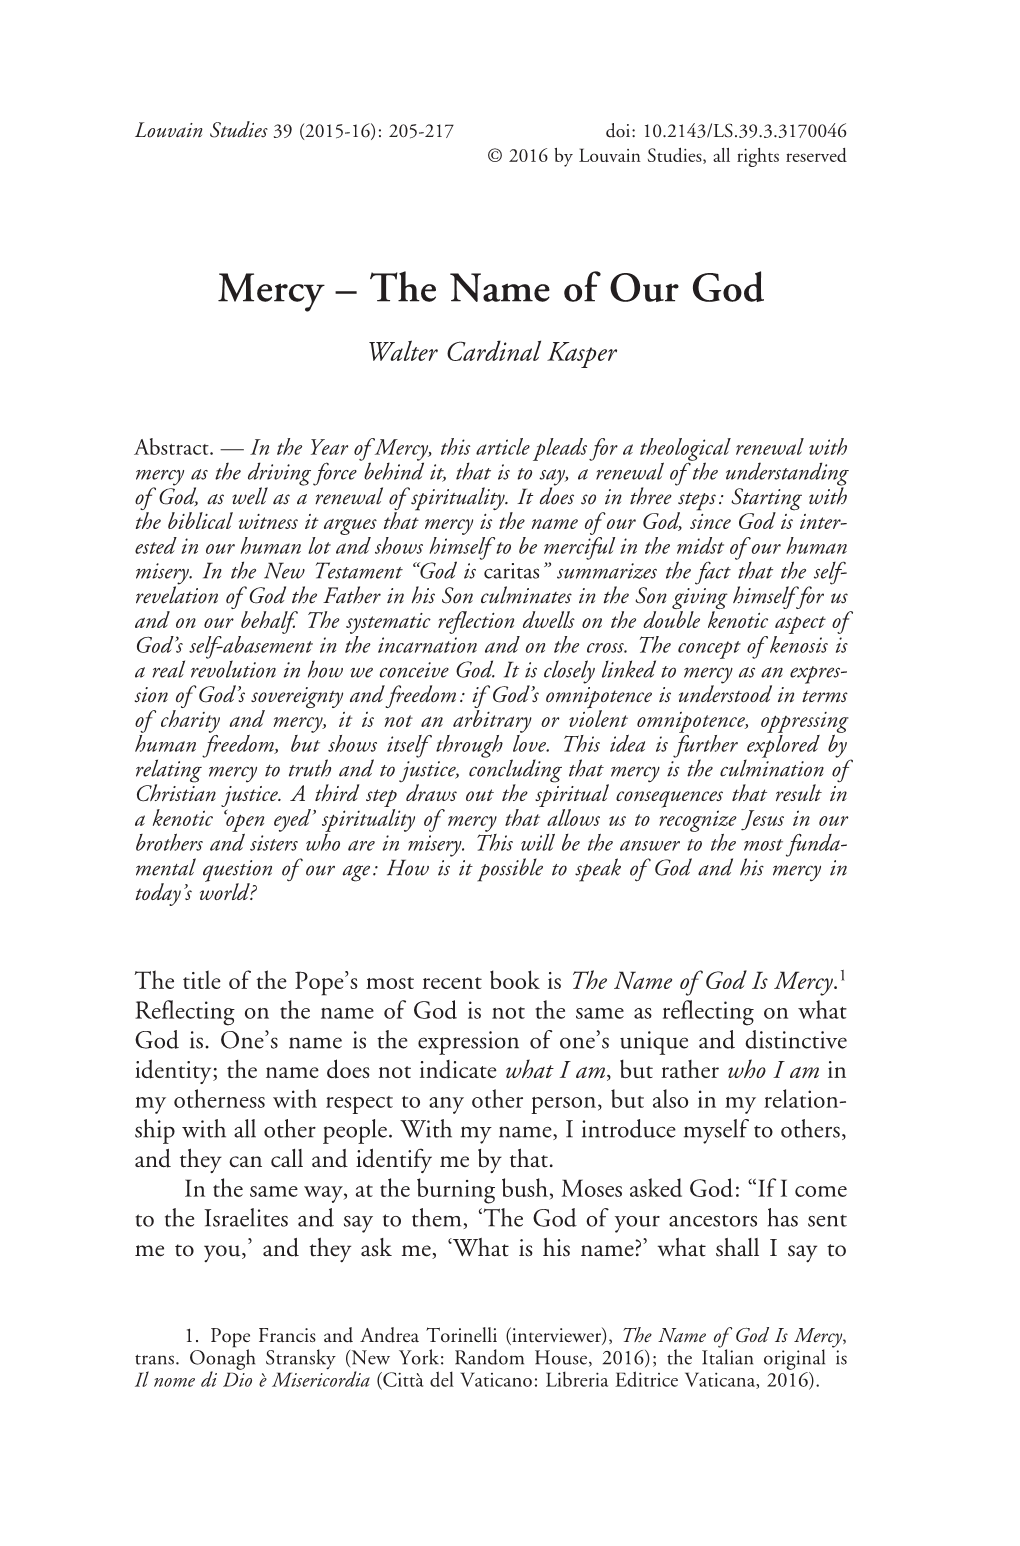 Mercy – the Name of Our God Walter Cardinal Kasper